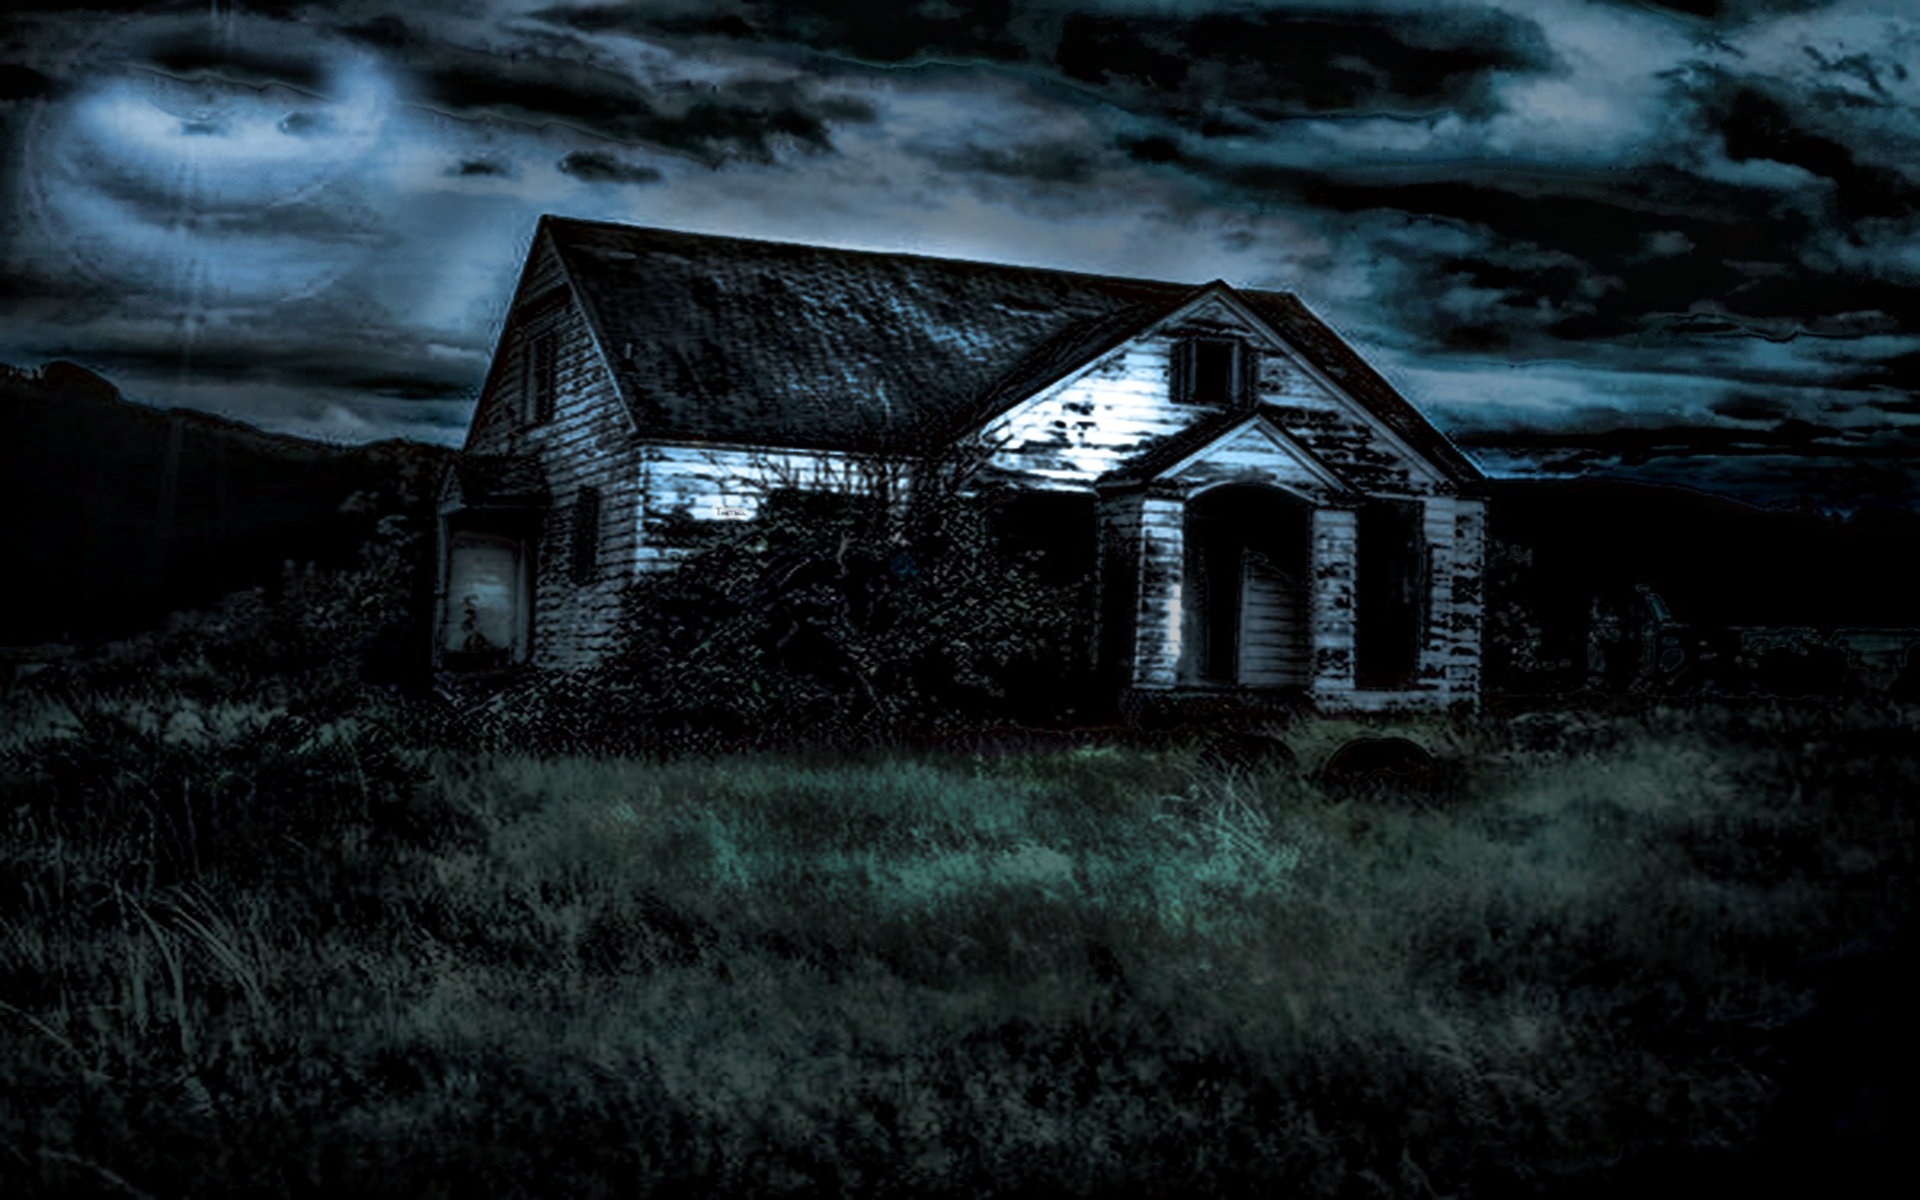 Scary house by Stanky991 on